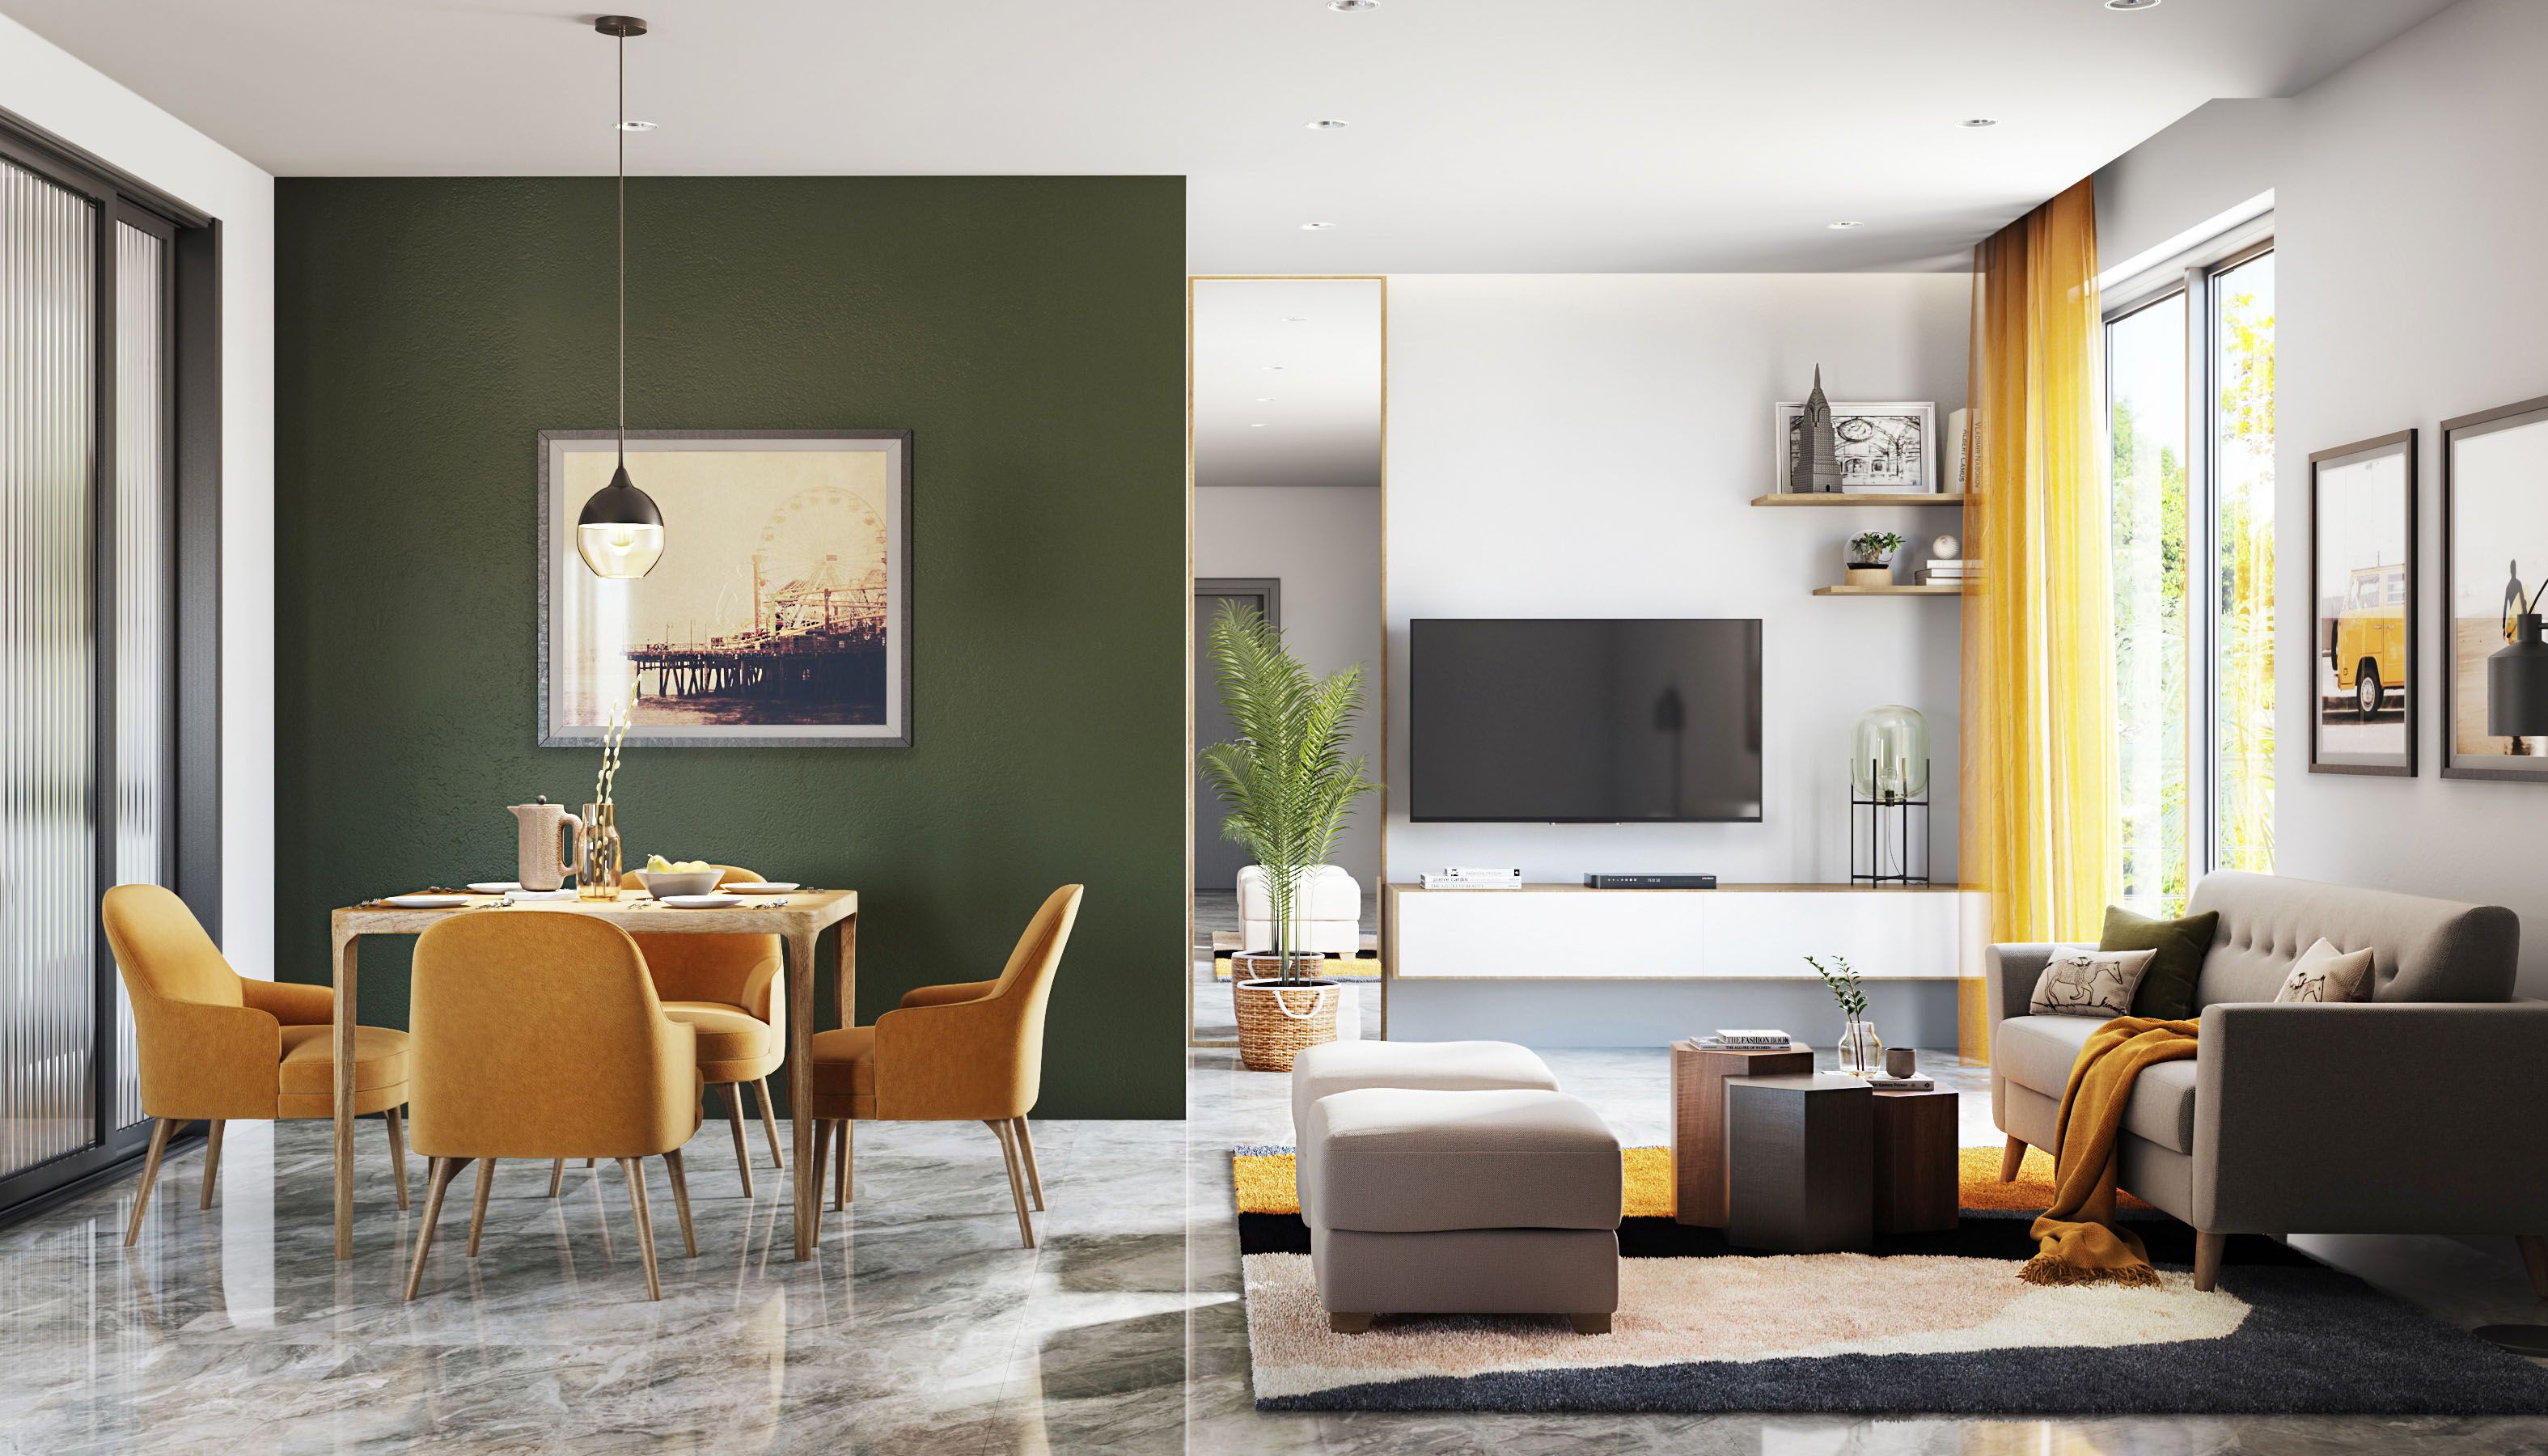 Contemporary Space-Saving Living Room Design With Integrated 4-Seater Dining Table And Wall-Mounted TV Console